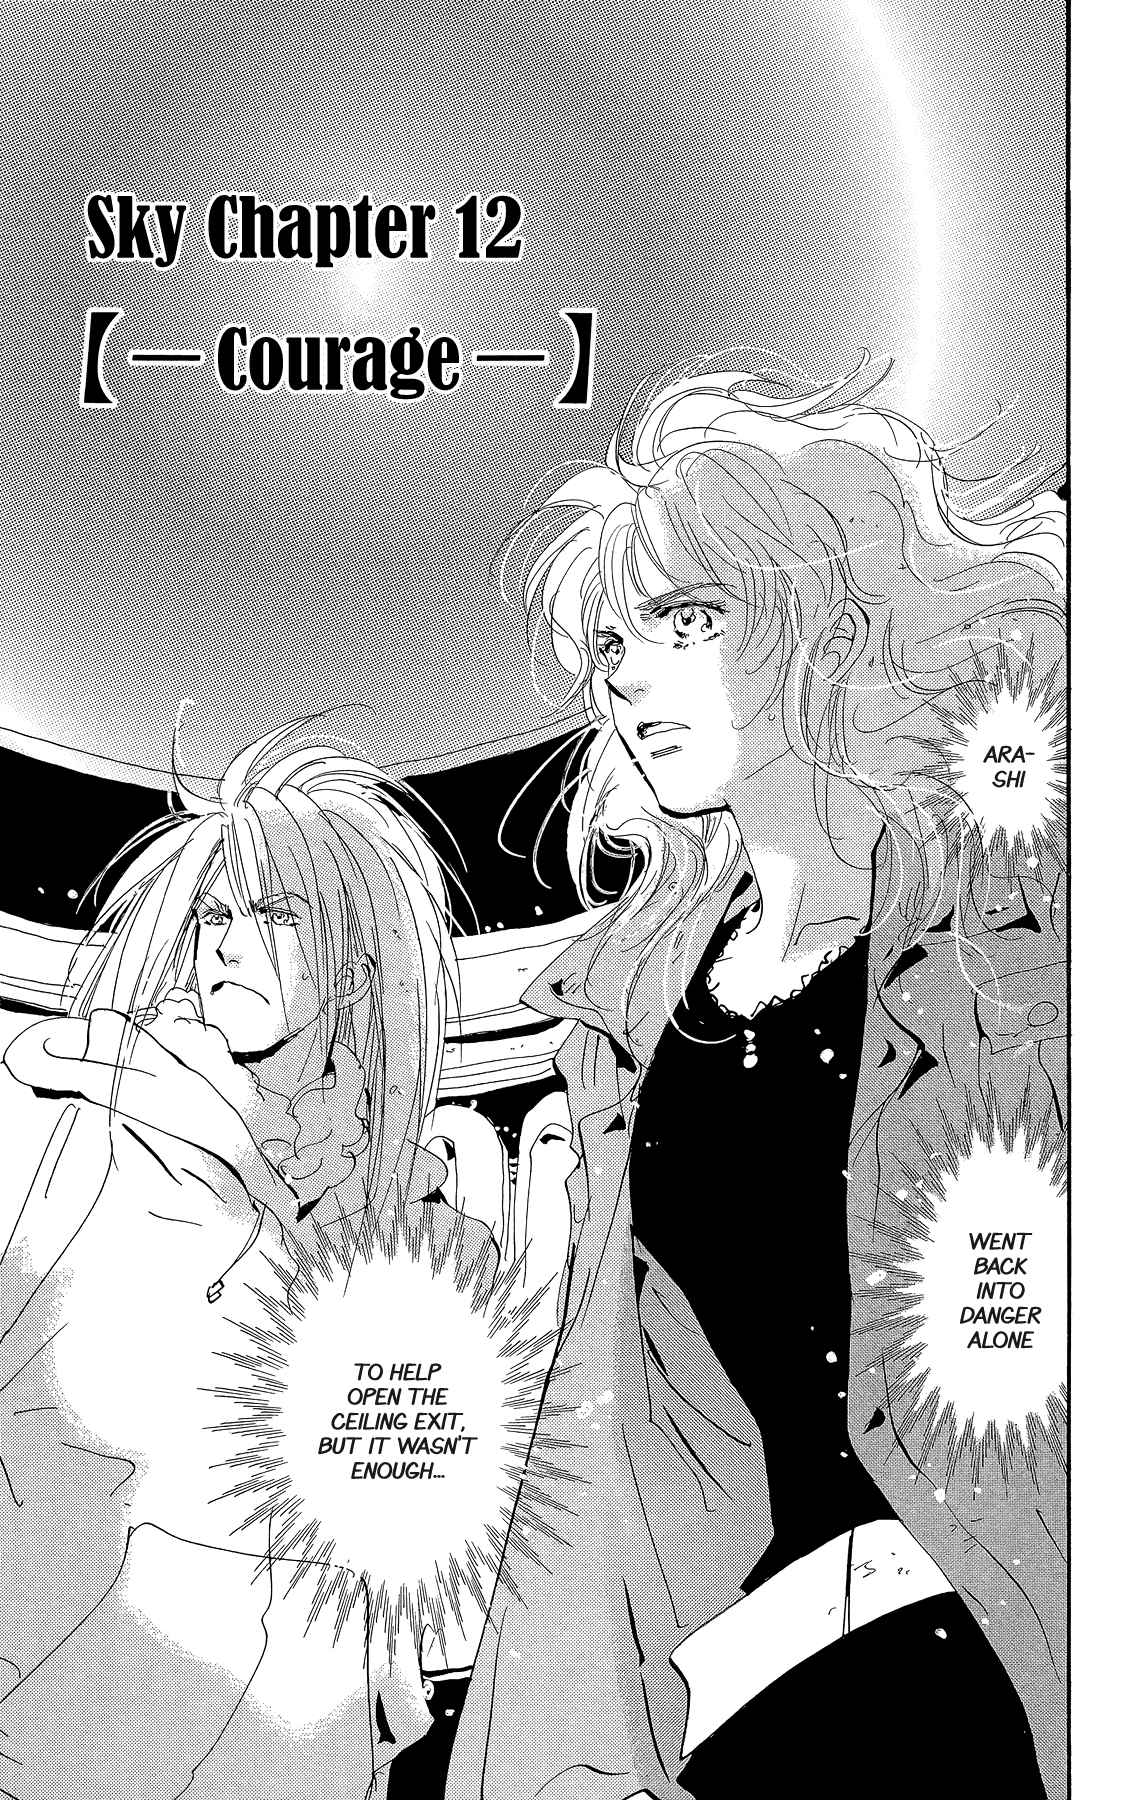 7 Seeds Vol. 34 Ch. 175 Sky Chapter 12 [Courage]